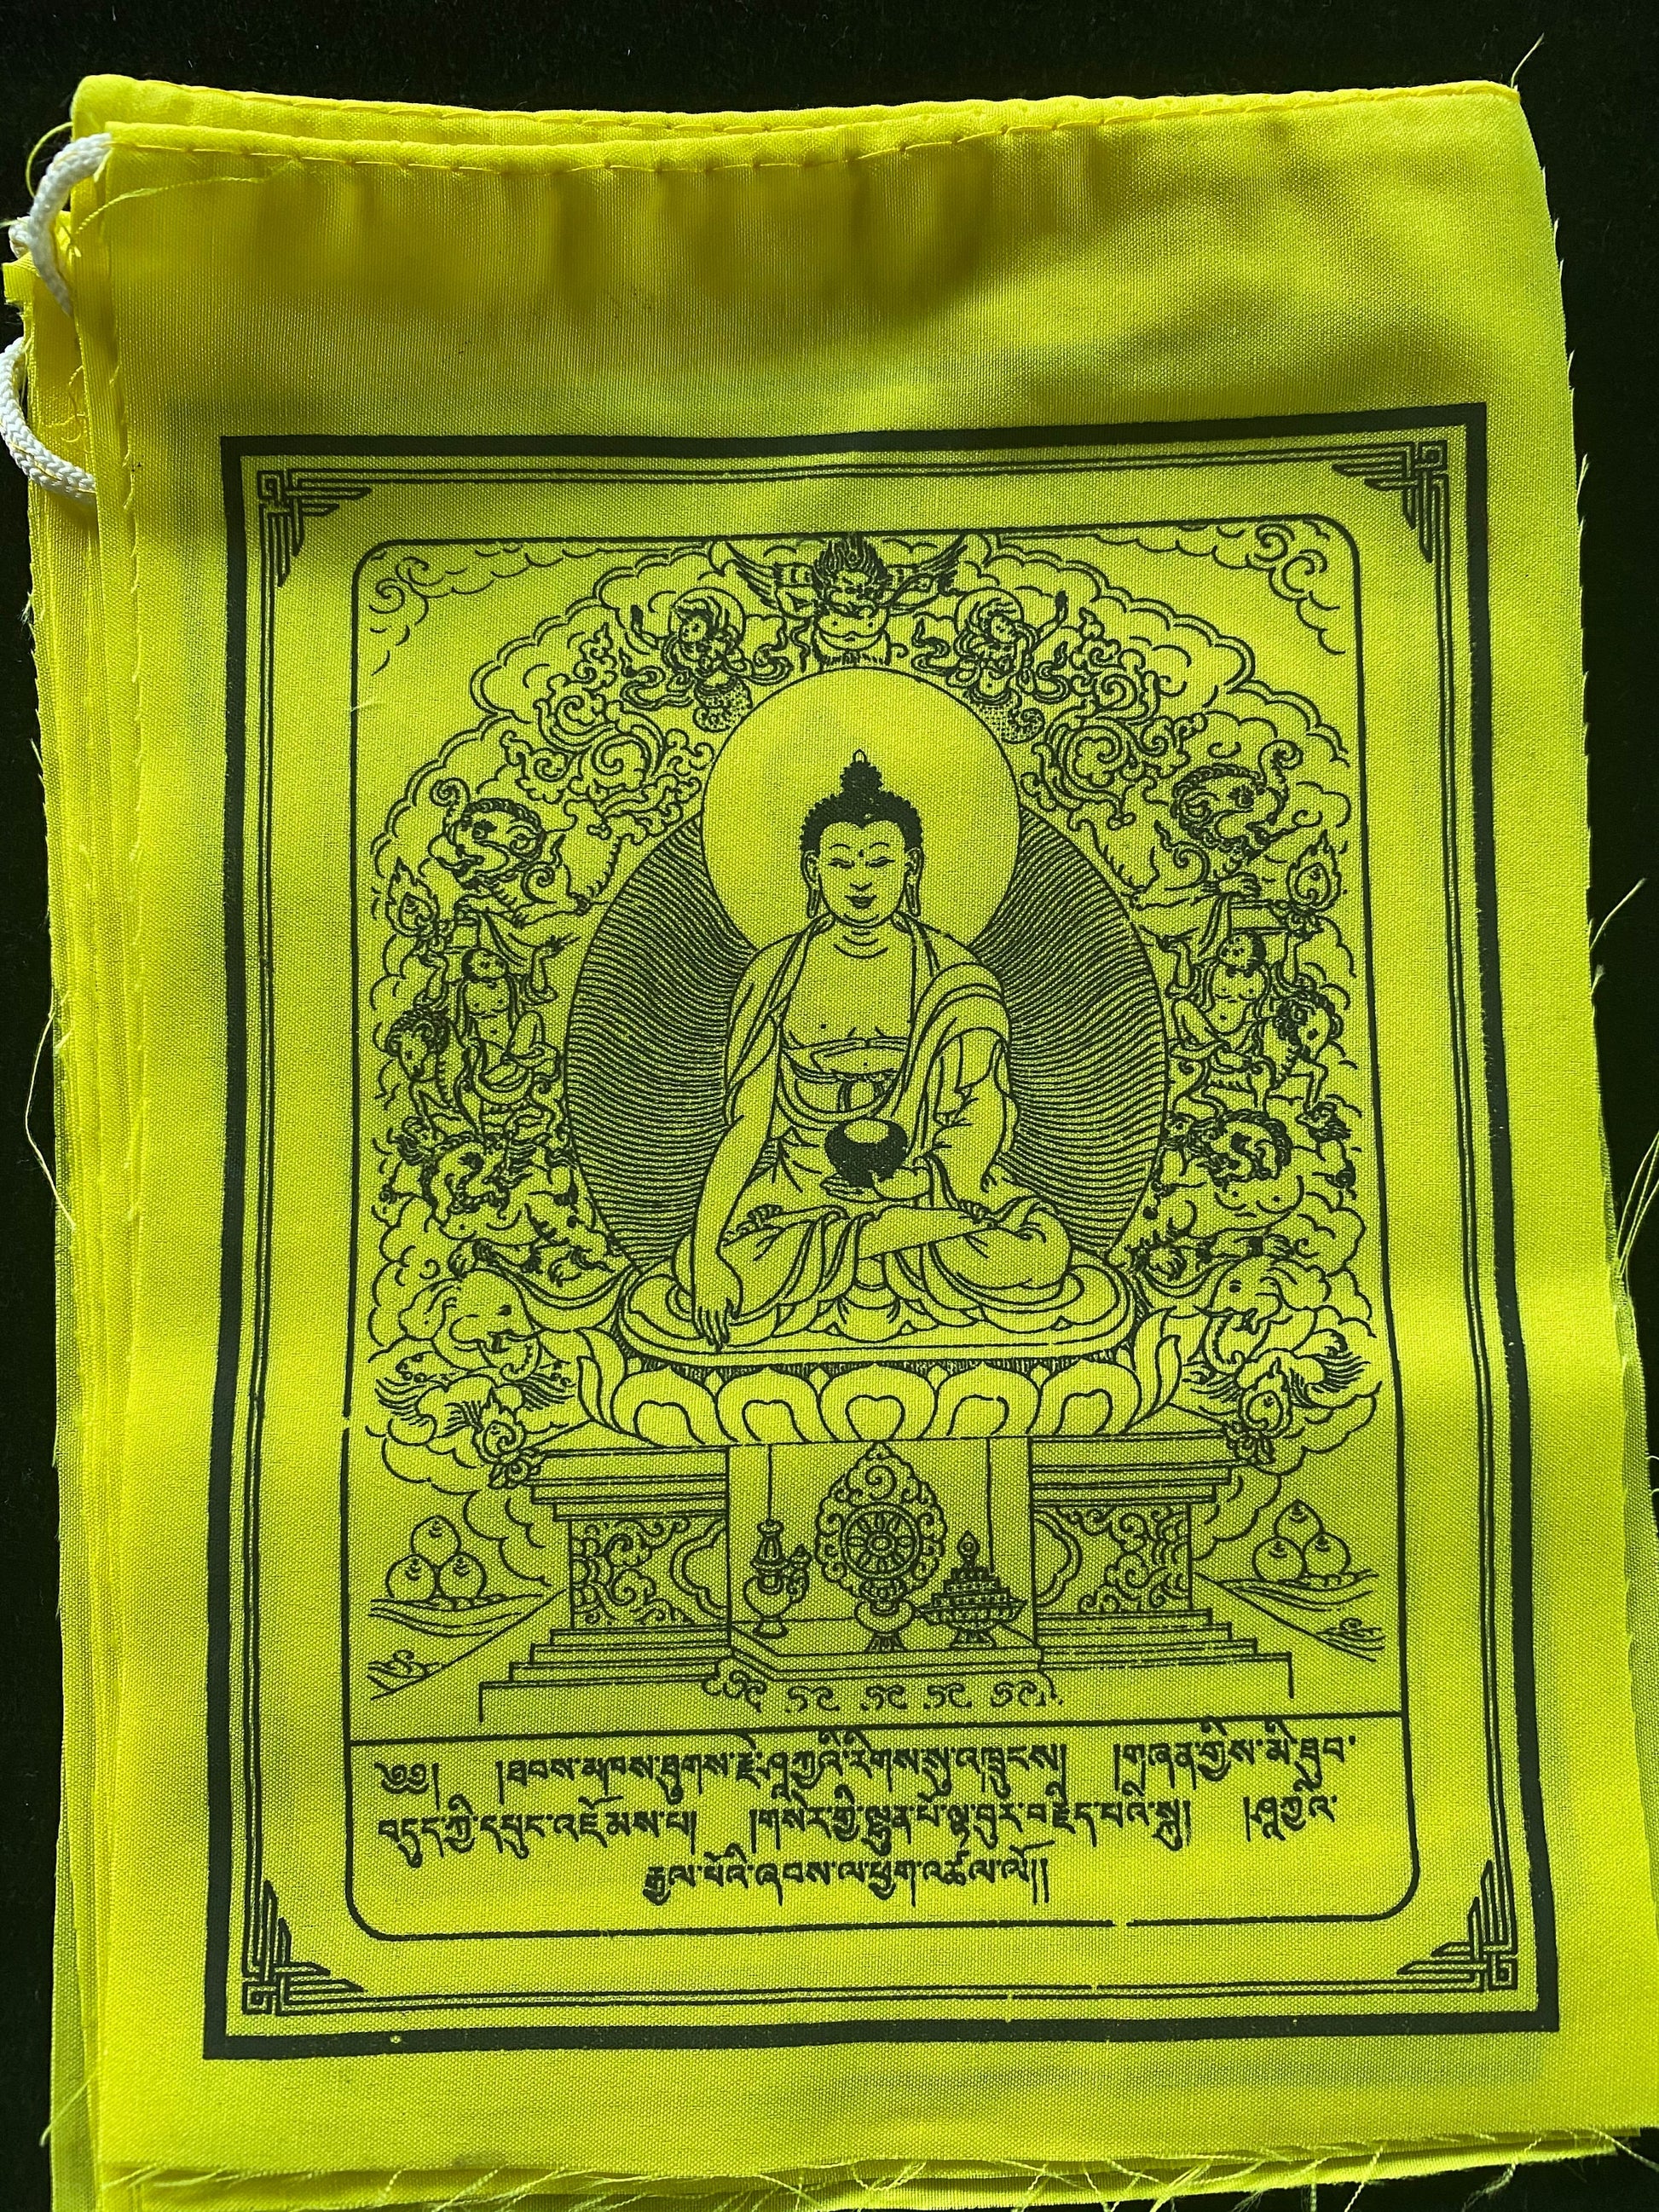 Enjoy a captivating close-up of one of 10 all-yellow Buddha Shakyamuni Prayer flags, each 6&quot;x7.5&quot;, arranged on a black background